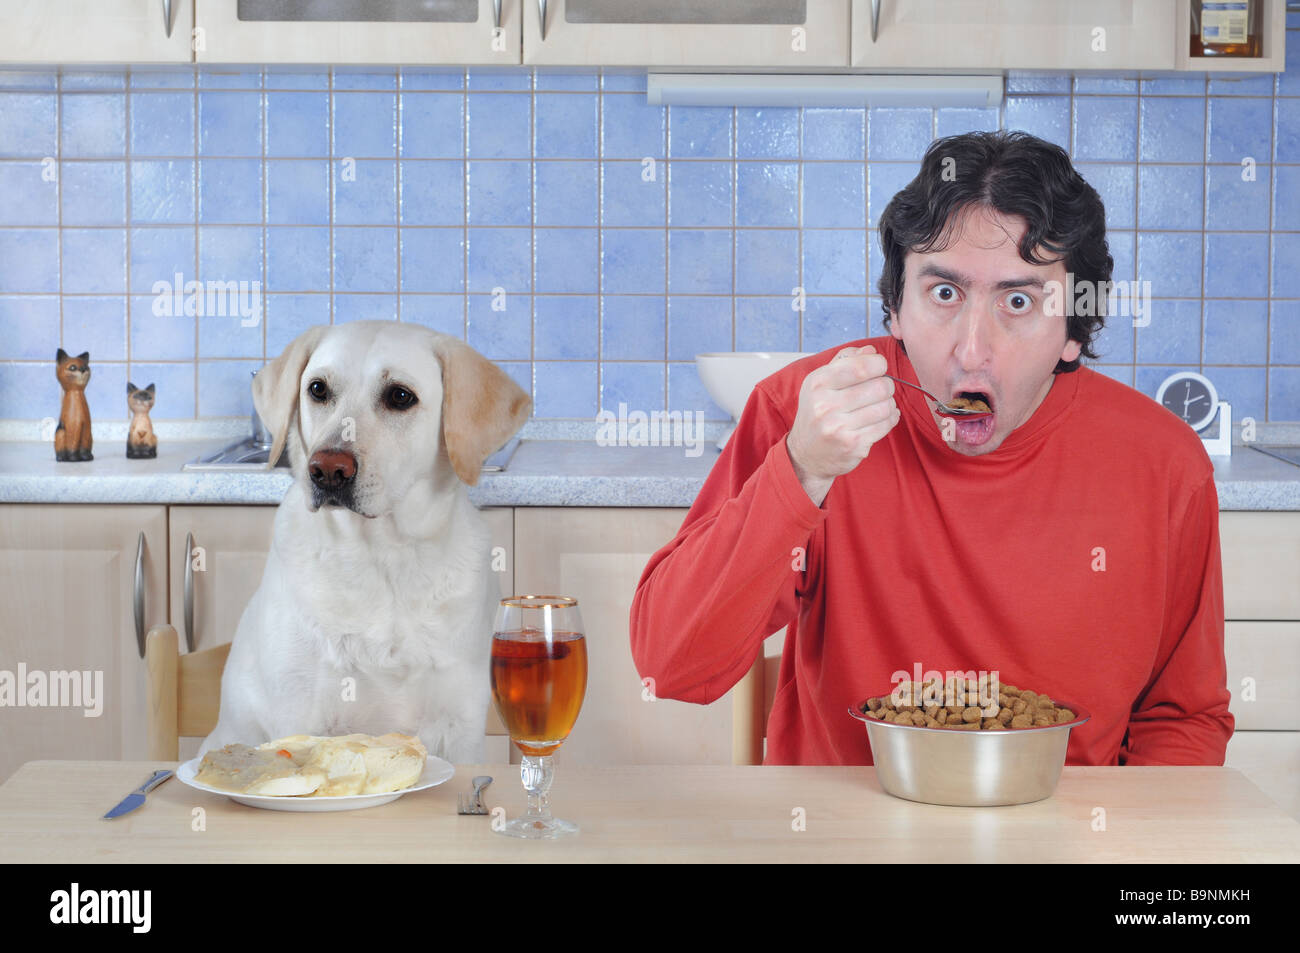 Role exchange - man and dog eating dinner. Stock Photo